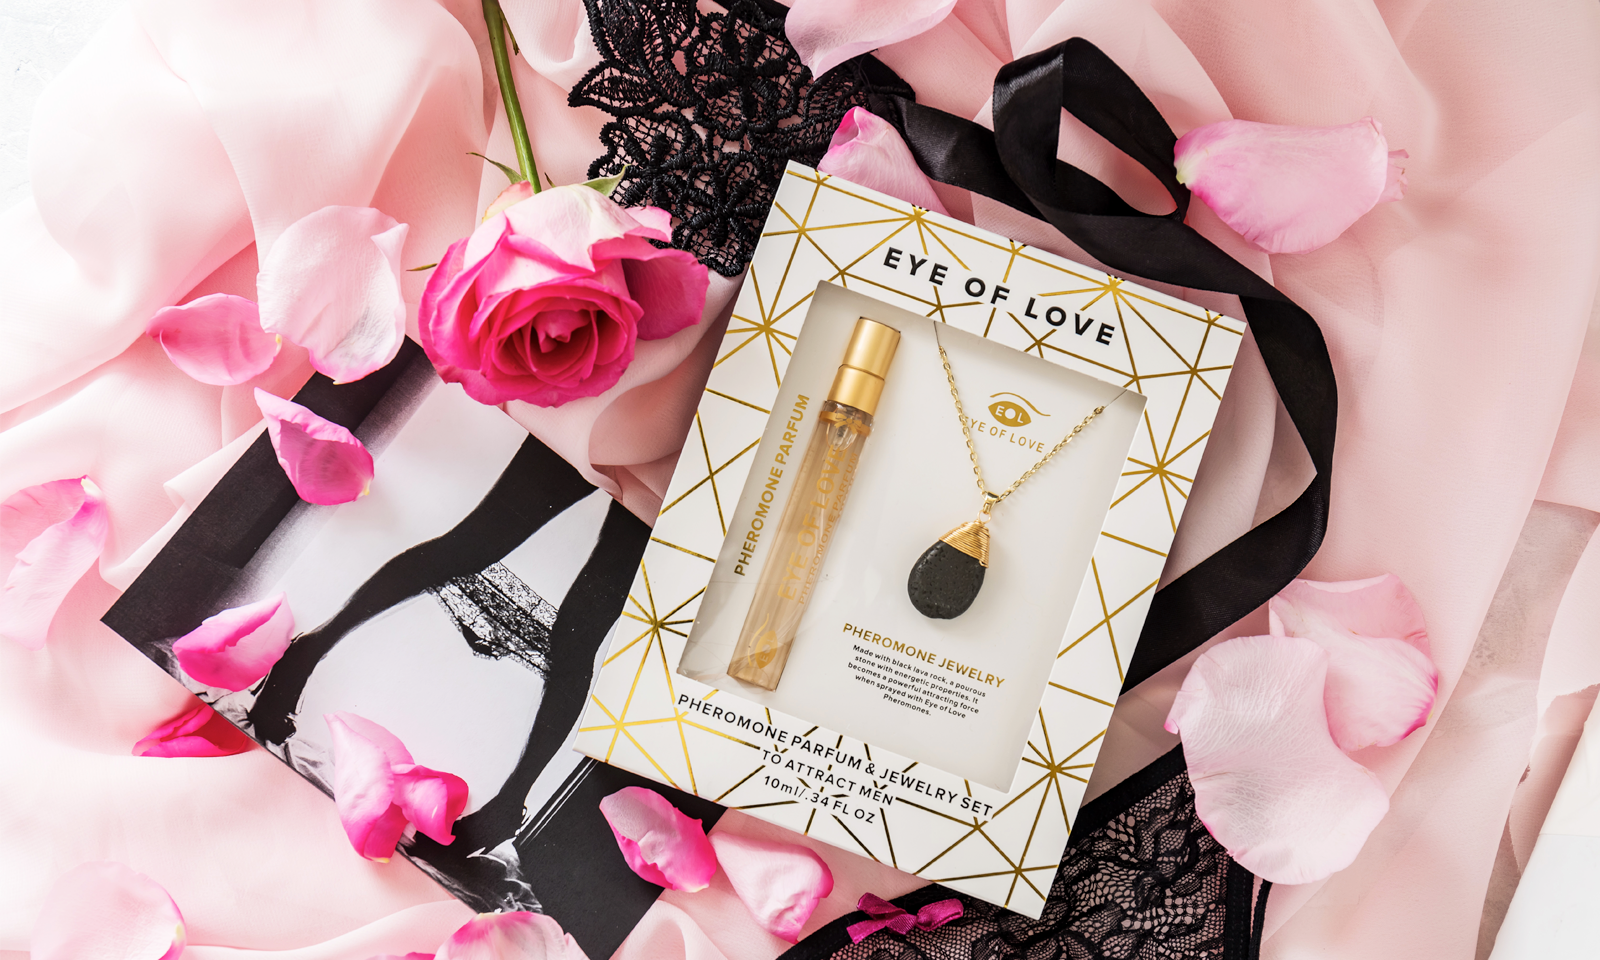 Eye of Love, Dr. Ava Cadell to Debut Pheromone Jewelry Gift Sets